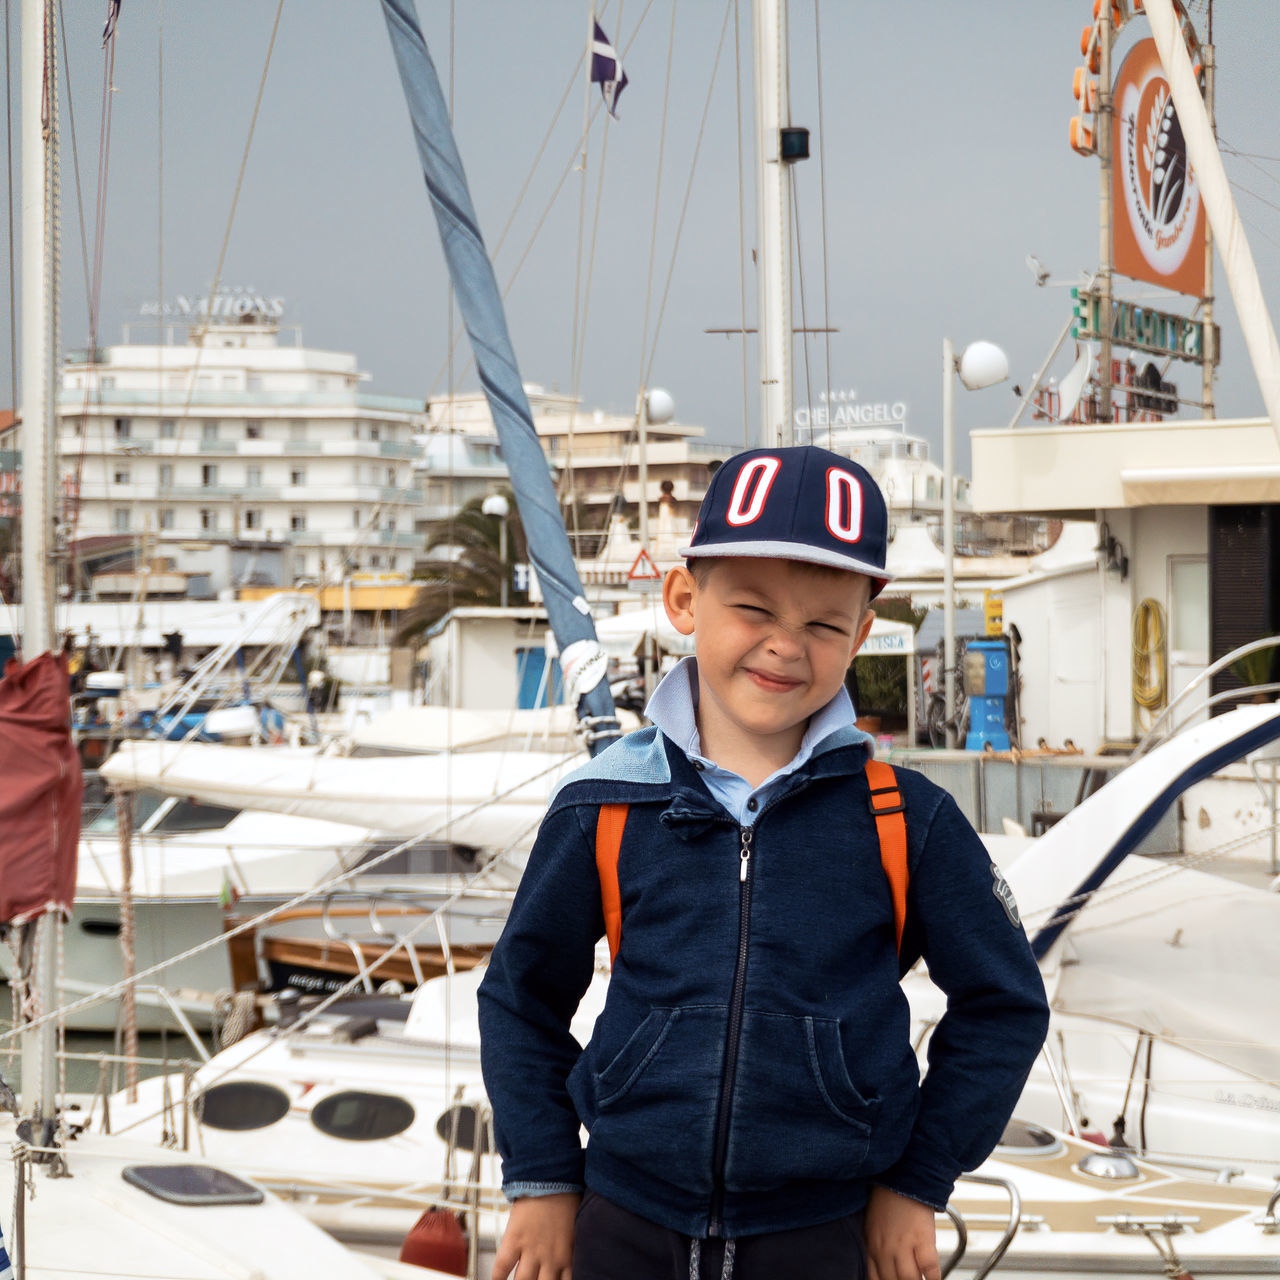 nautical vessel, looking at camera, men, boys, portrait, real people, transportation, mode of transportation, males, standing, smiling, child, one person, sailboat, front view, childhood, water, happiness, casual clothing, sailor, innocence